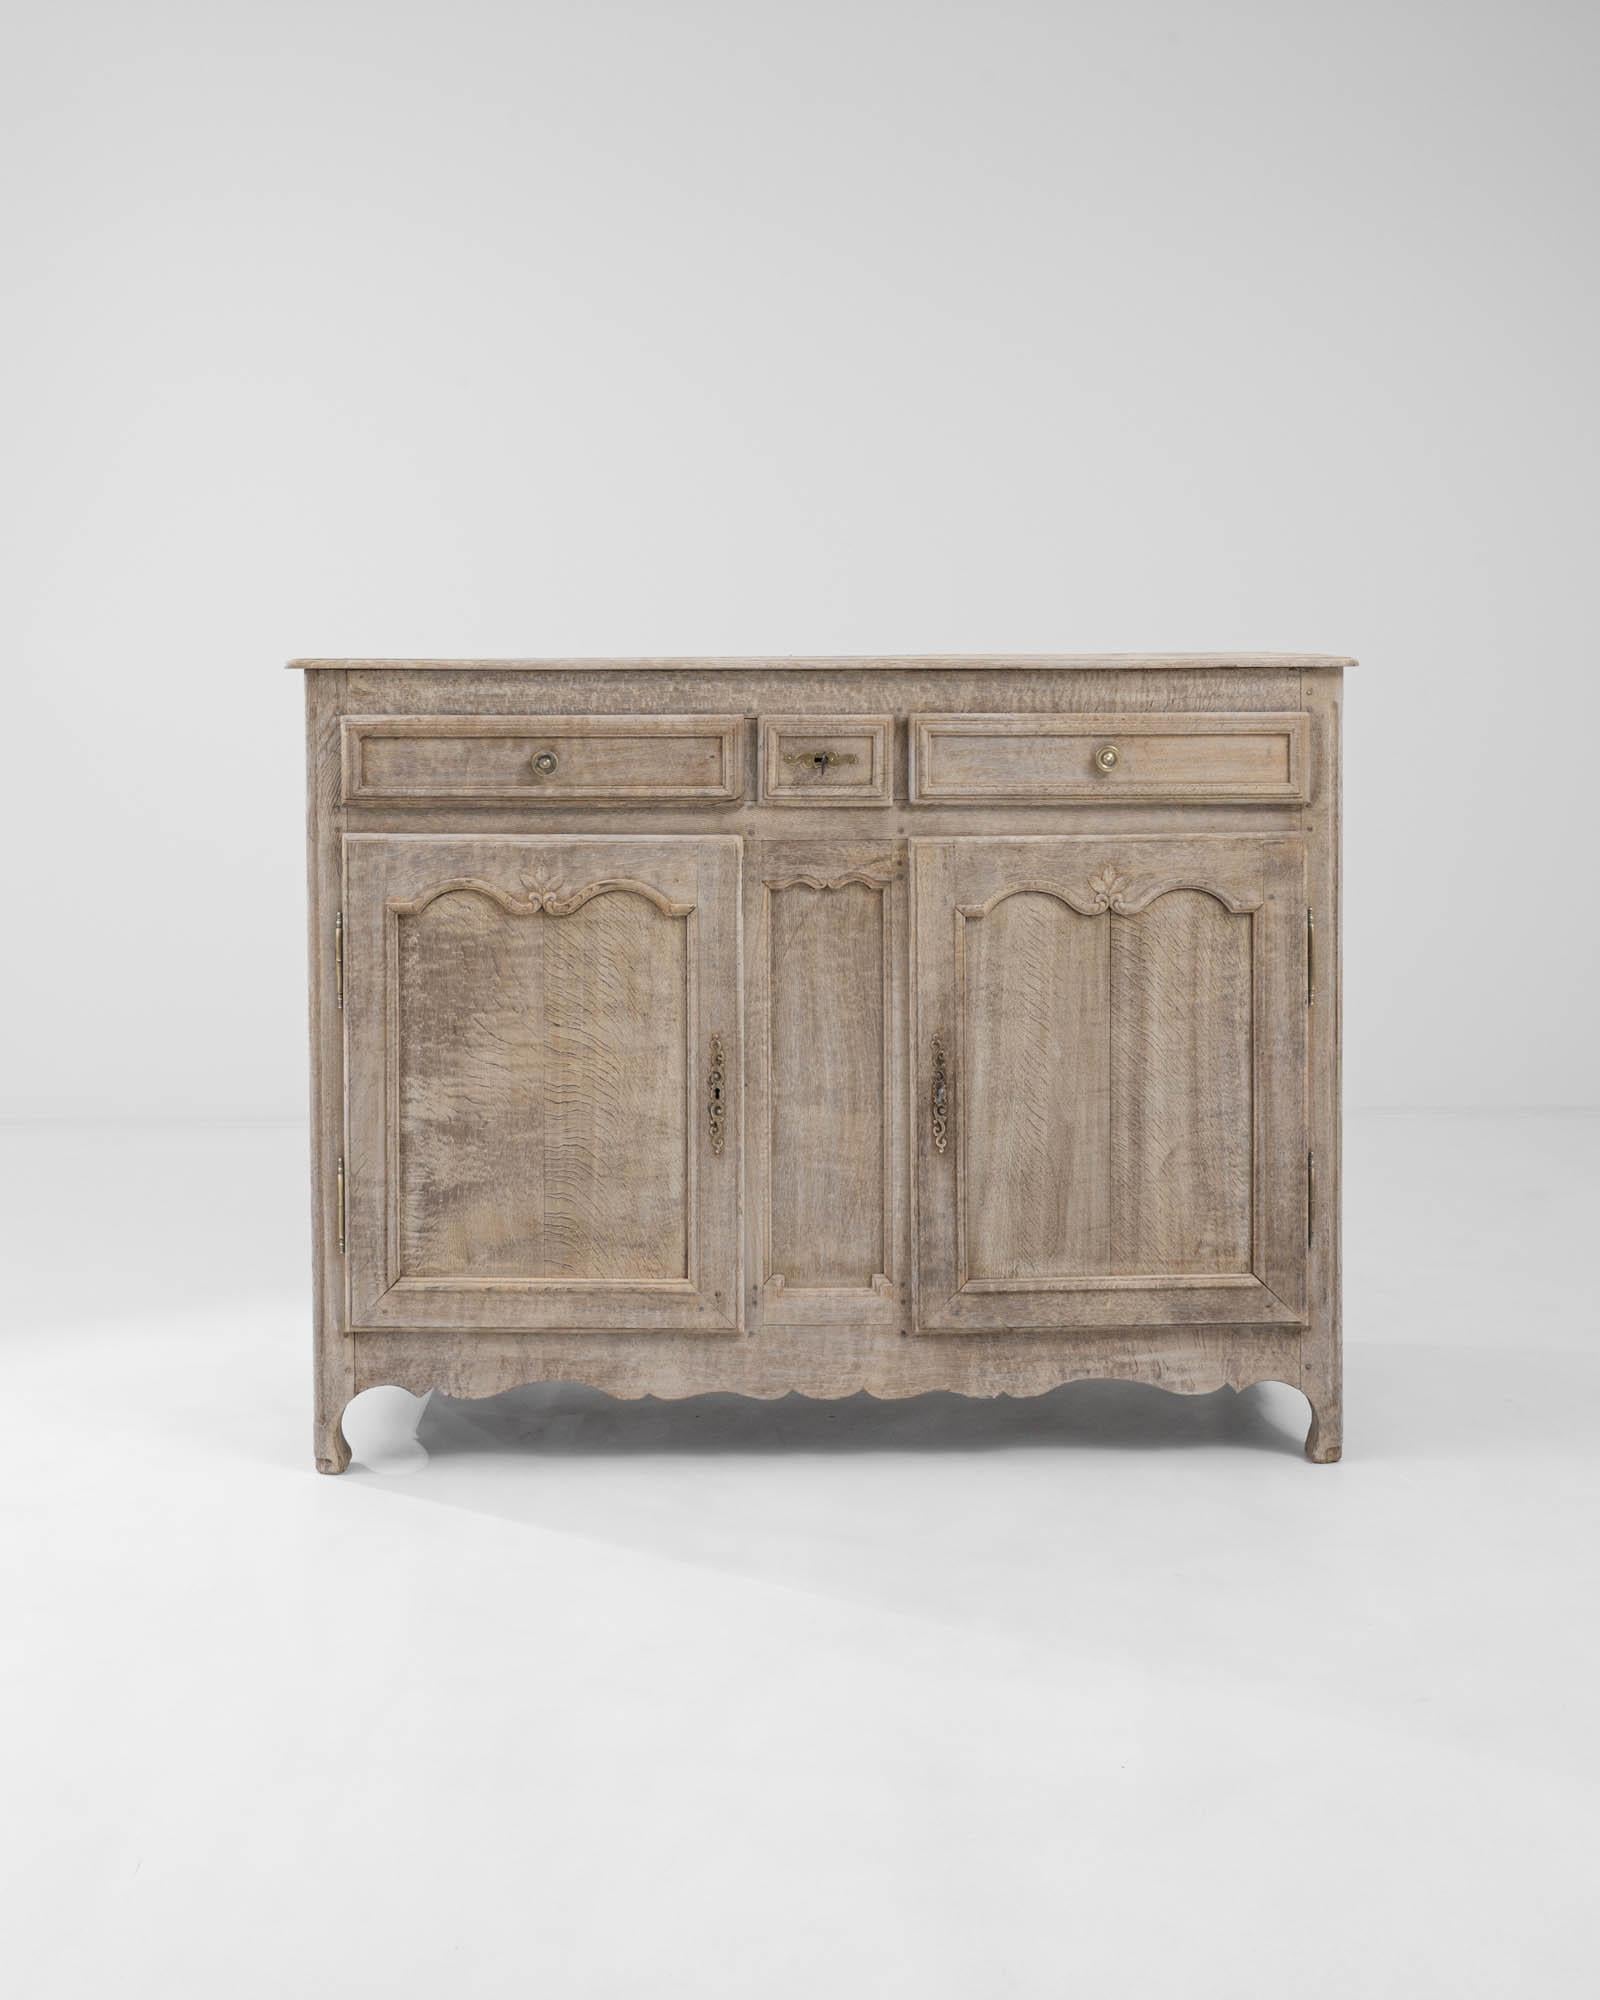 A wooden buffet made in 19th century France. Presenting itself with a dignified ornateness, a cheery glow emits from the finely sculpted oak of this buffet. The natural oak grain has been restored through a delicate bleaching process which both